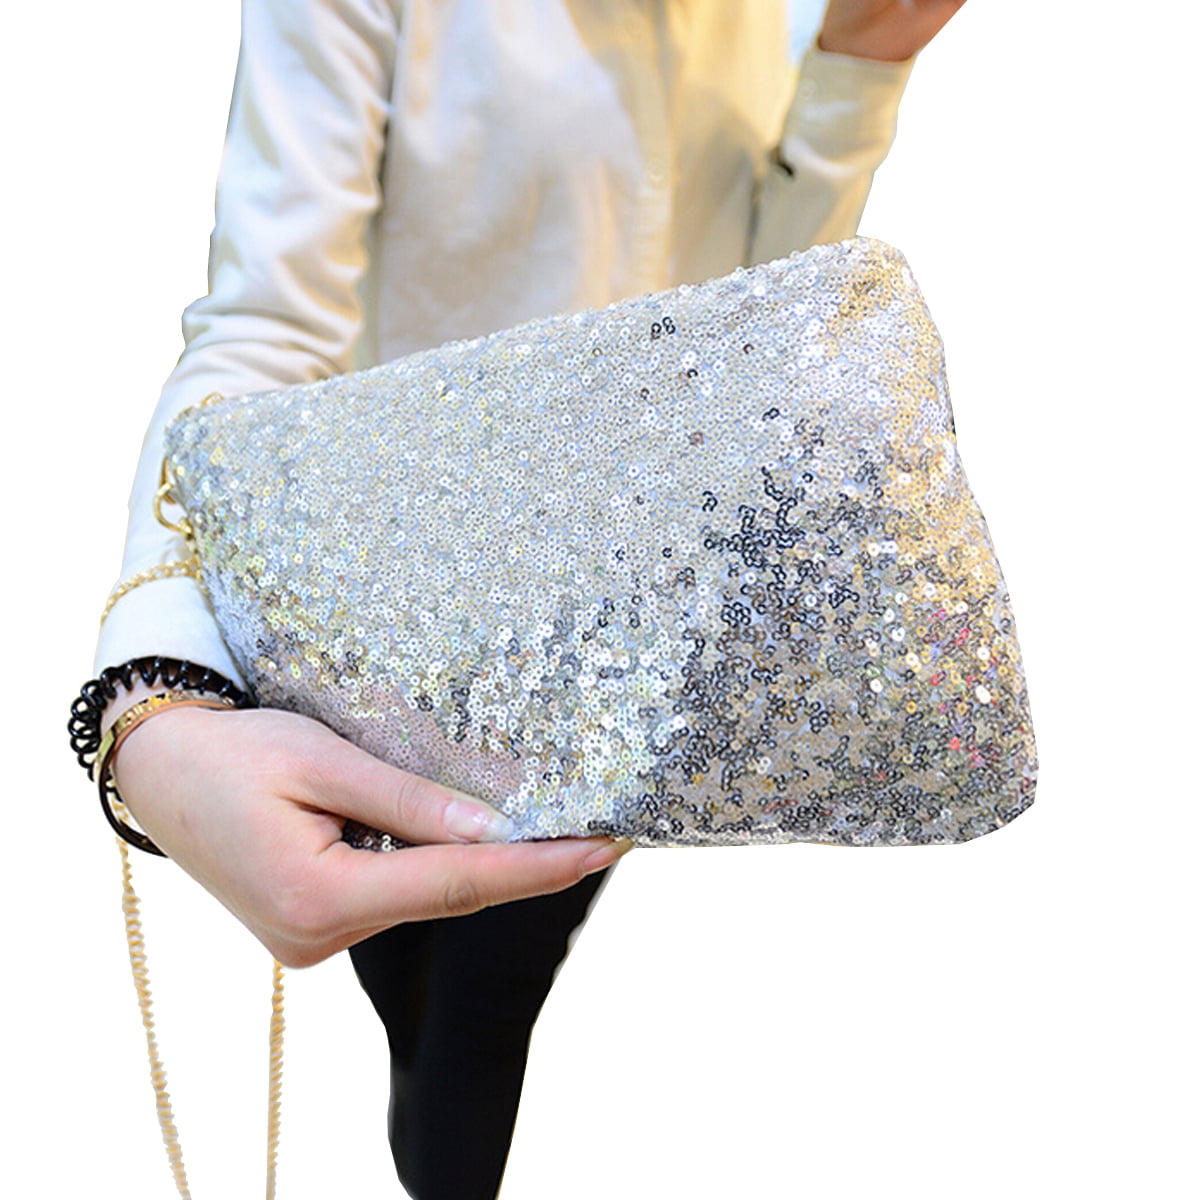 Fashion Sparkly Sequin Clutch Bag Handbag Lady Party Evening Clutch Bag Purse Wallet for Women Shiny Green and Black 